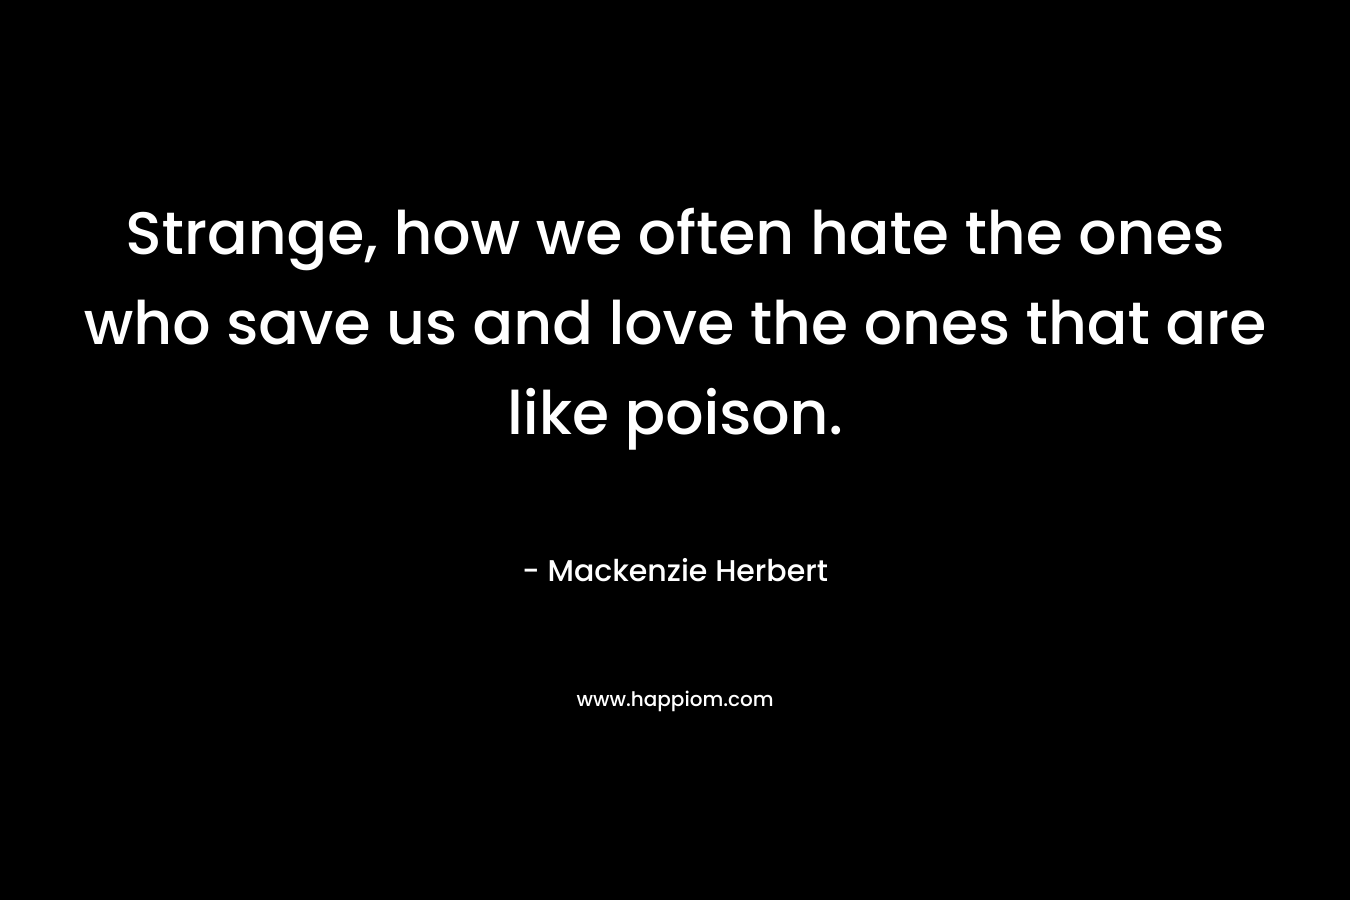 Strange, how we often hate the ones who save us and love the ones that are like poison.